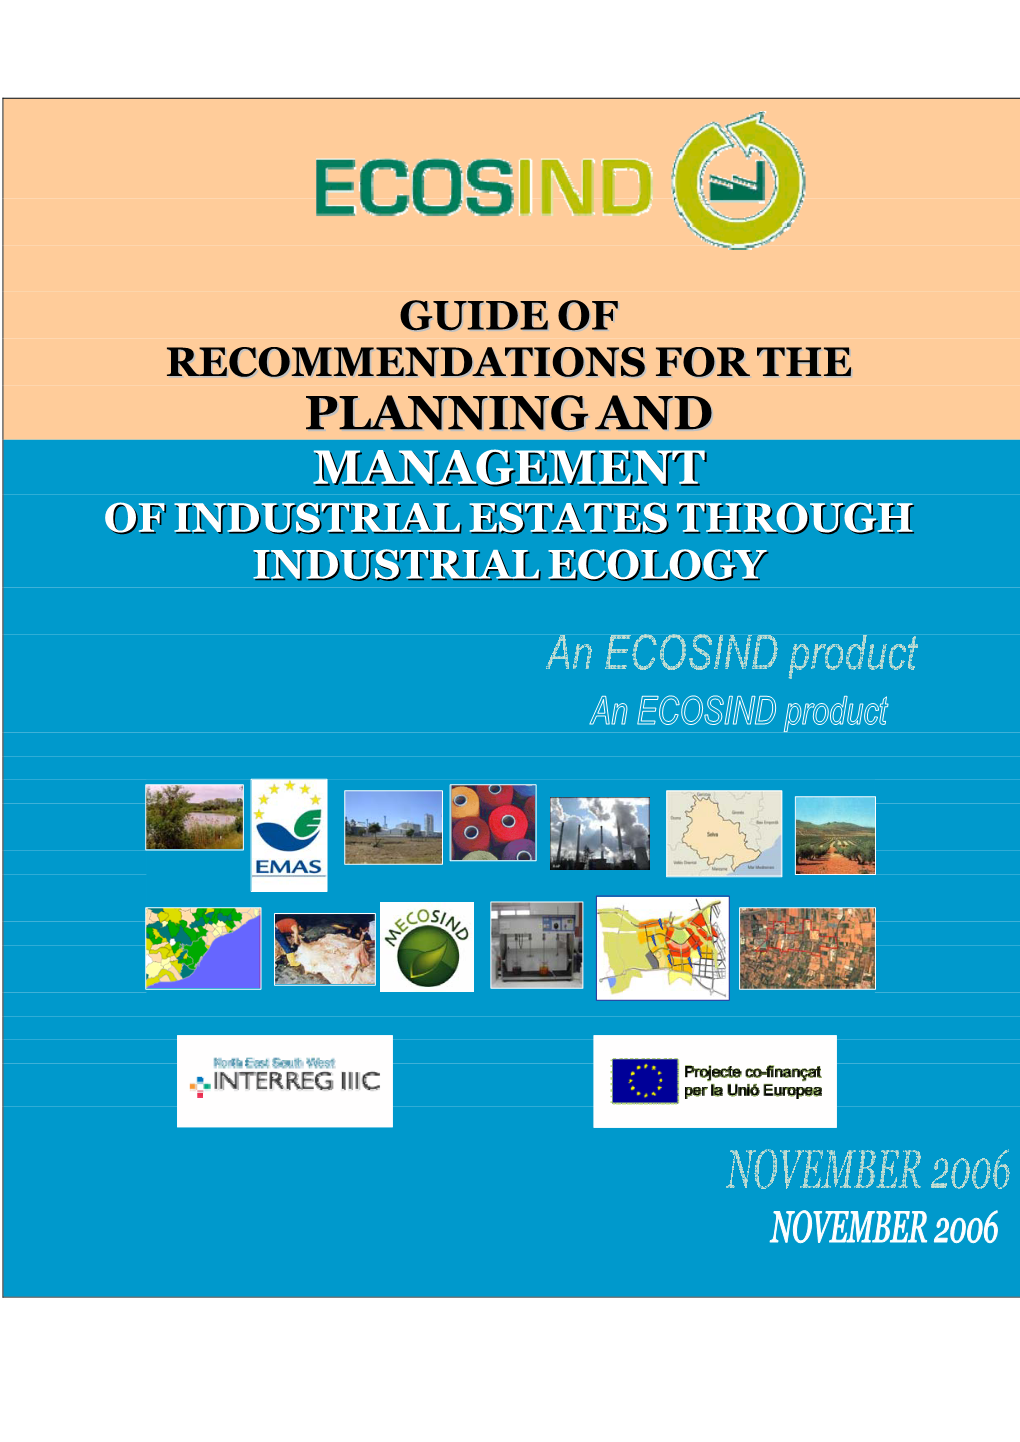 Guide of Recommendations for the Planning and Management of Industrial Estates Through Industrial Ecology- November 2006